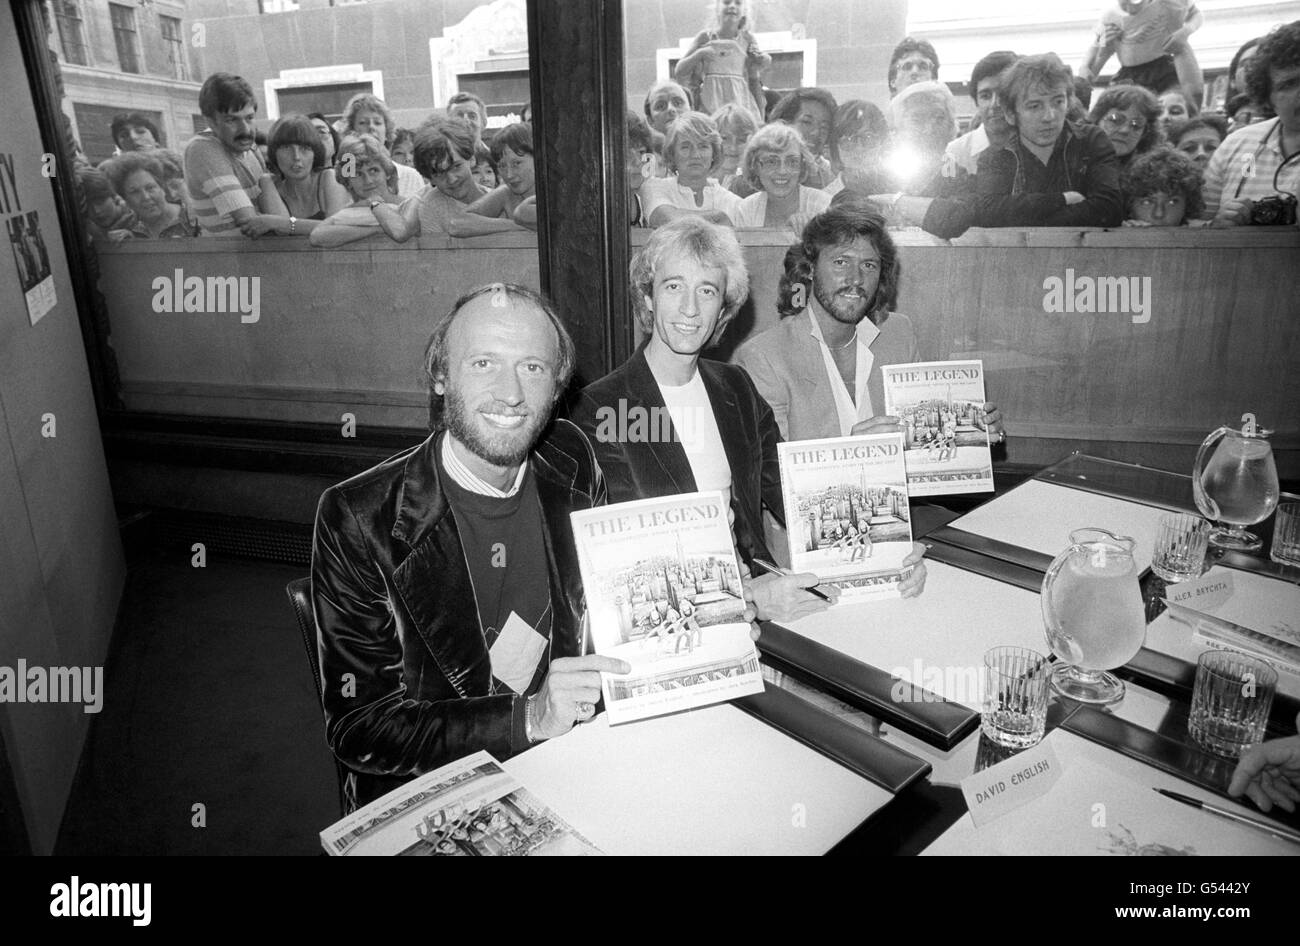 Music - The Bees Gees Book Signing - Liberty, London Stock Photo